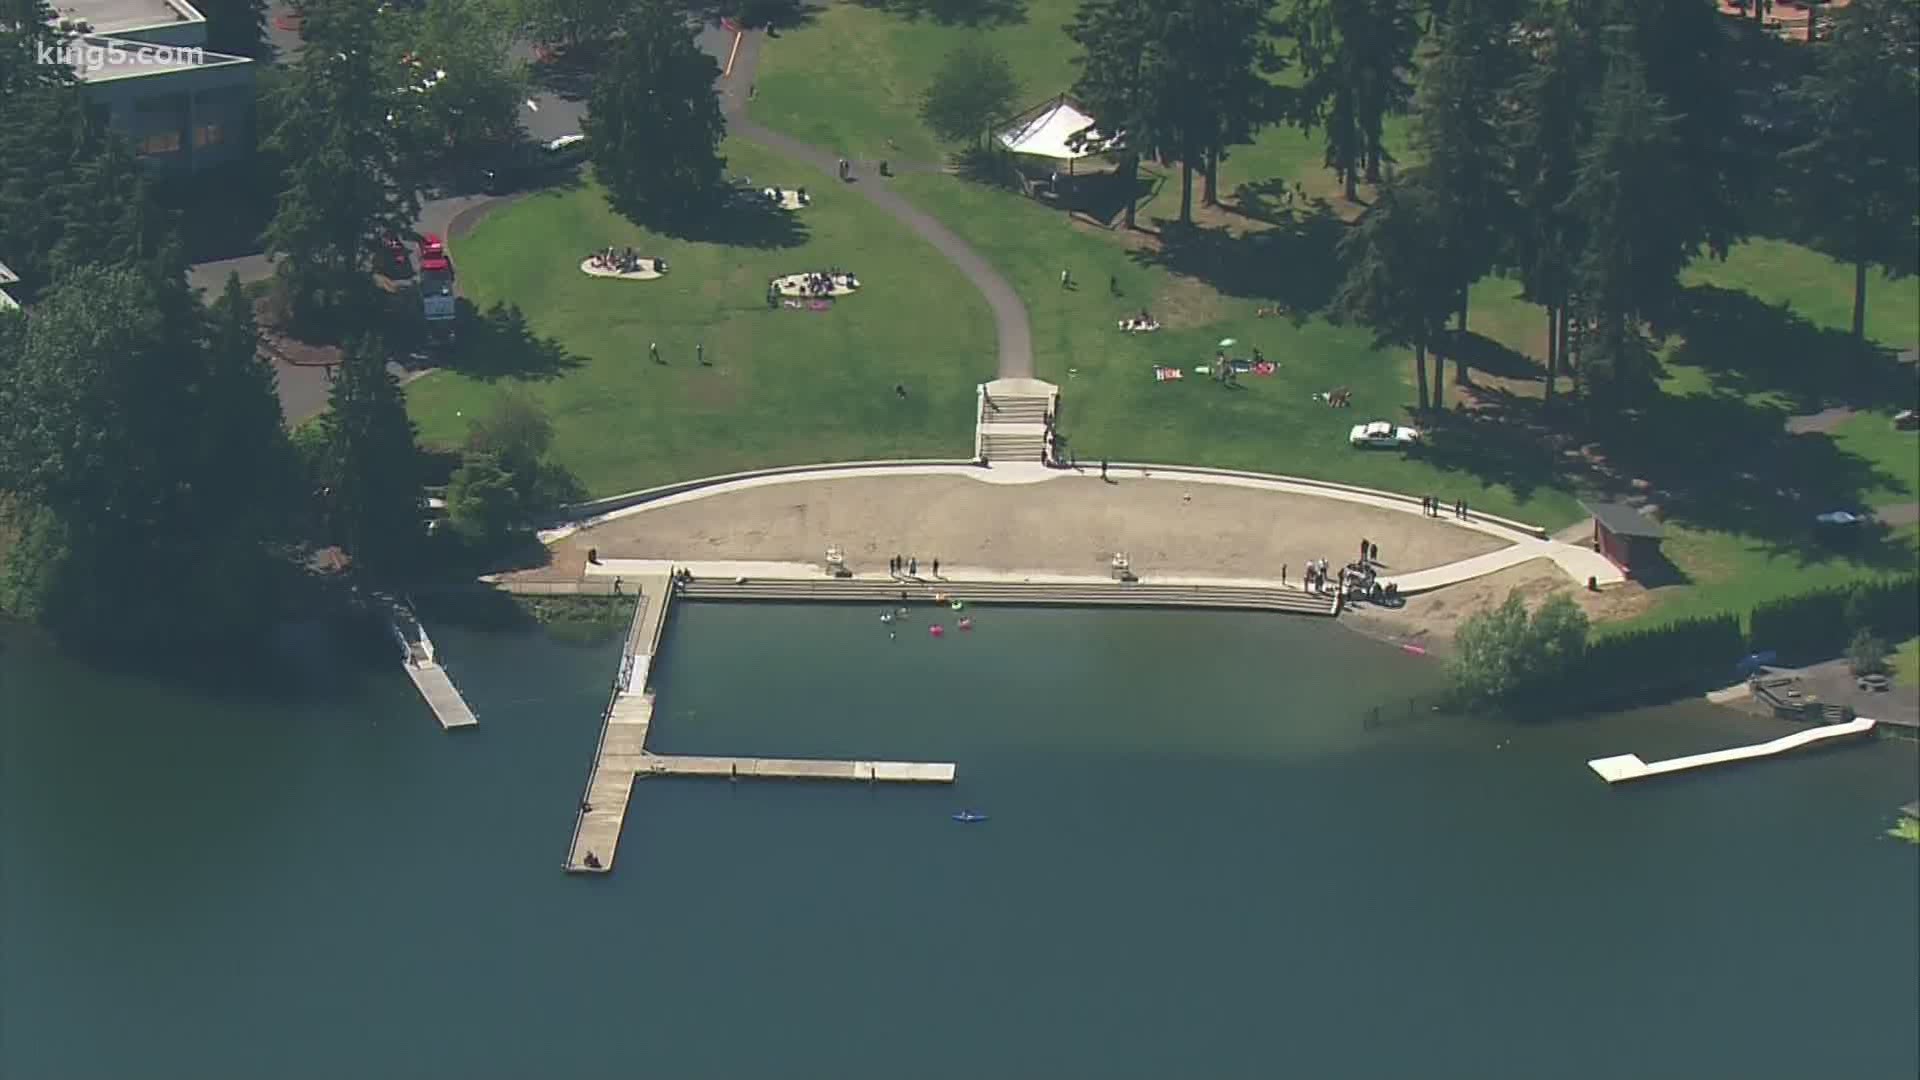 More people are expected to cool off in the water as temperatures rise in western Washington, but the Red Cross is warning people to be cautious.